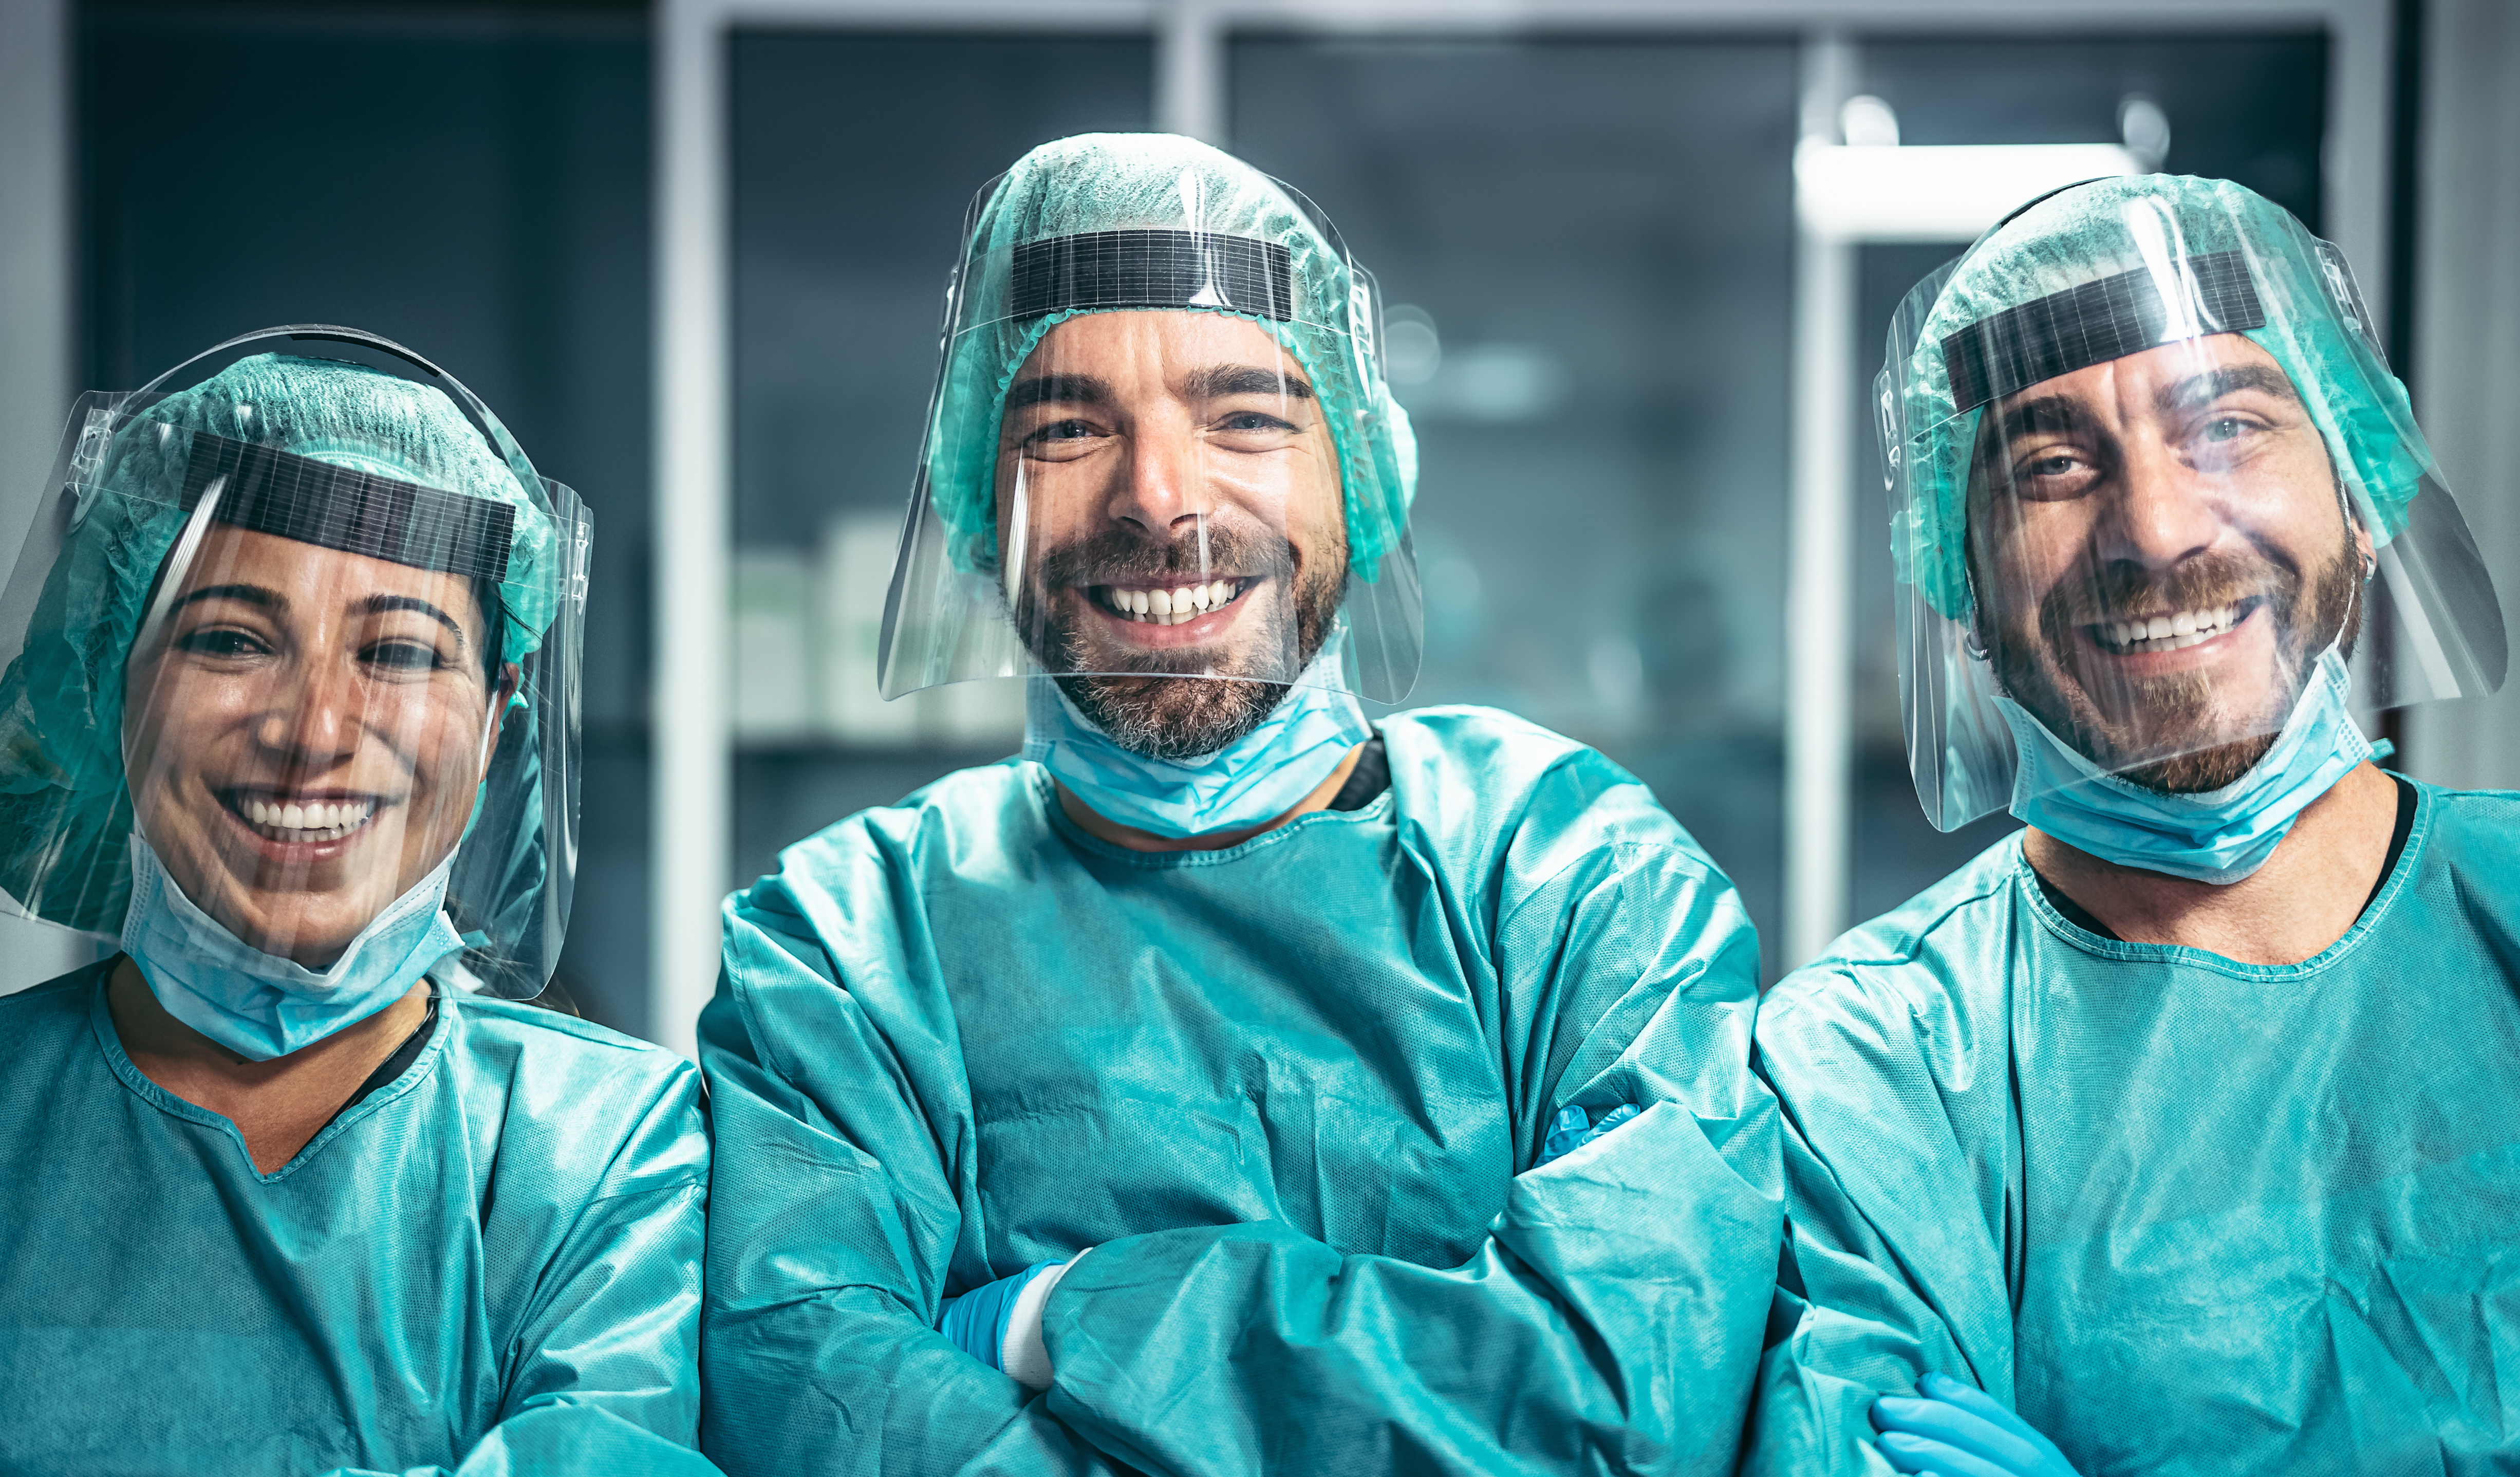 Surgeons smiling after a surgical operation